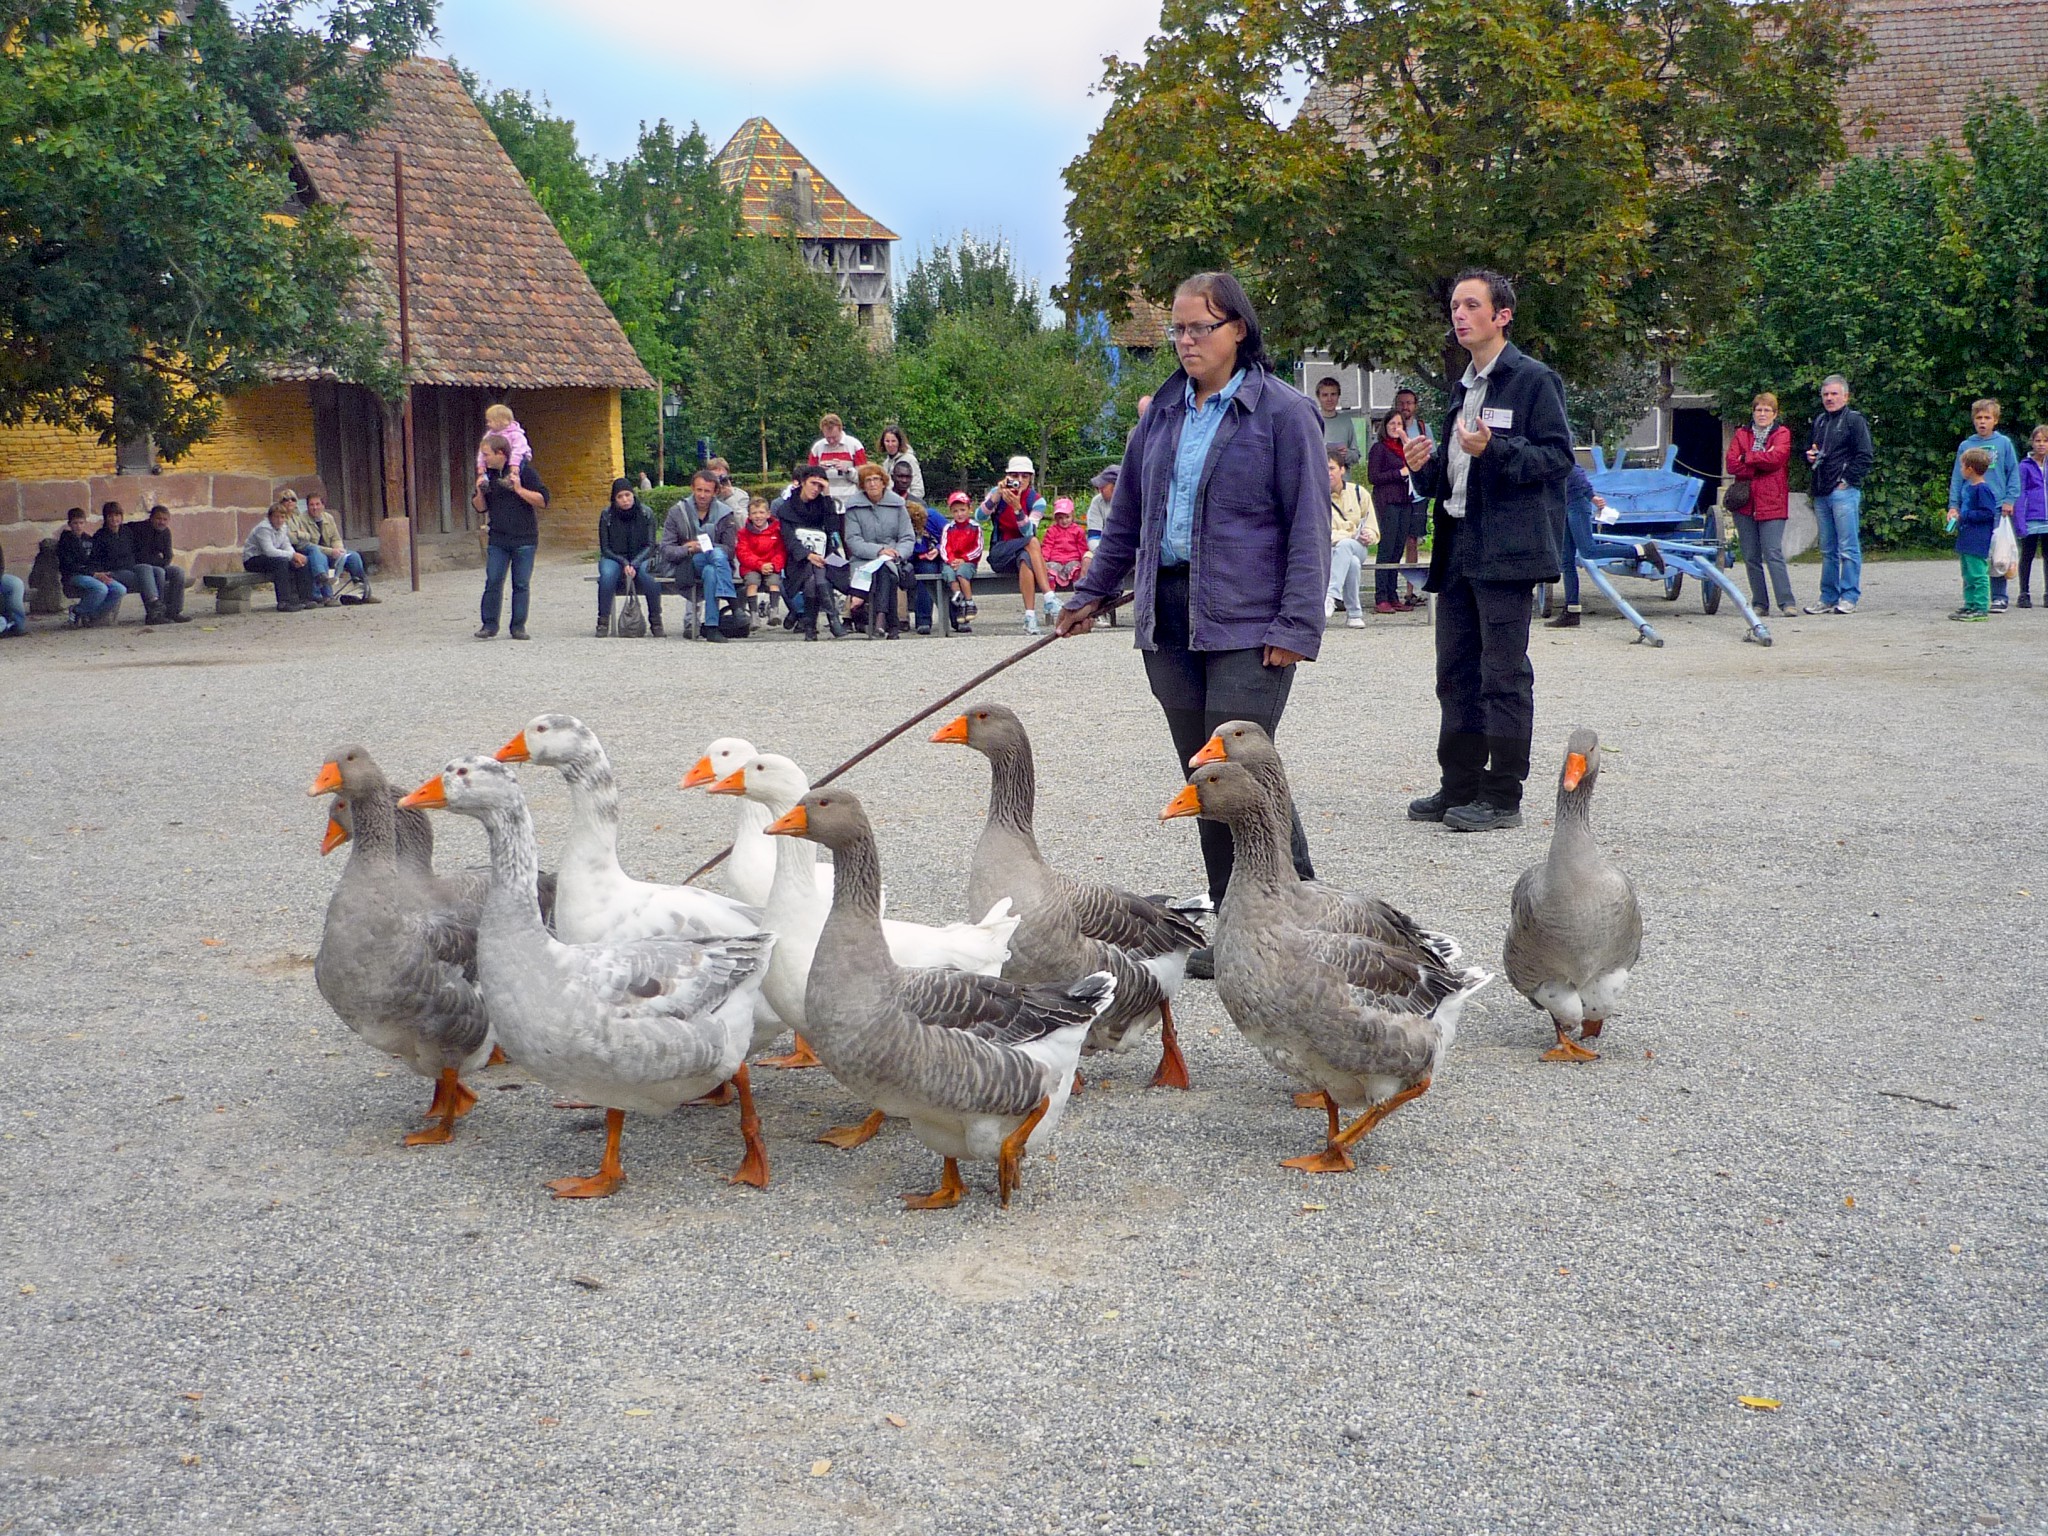 Geese at the Ecomusée d'Alsace © French Moments